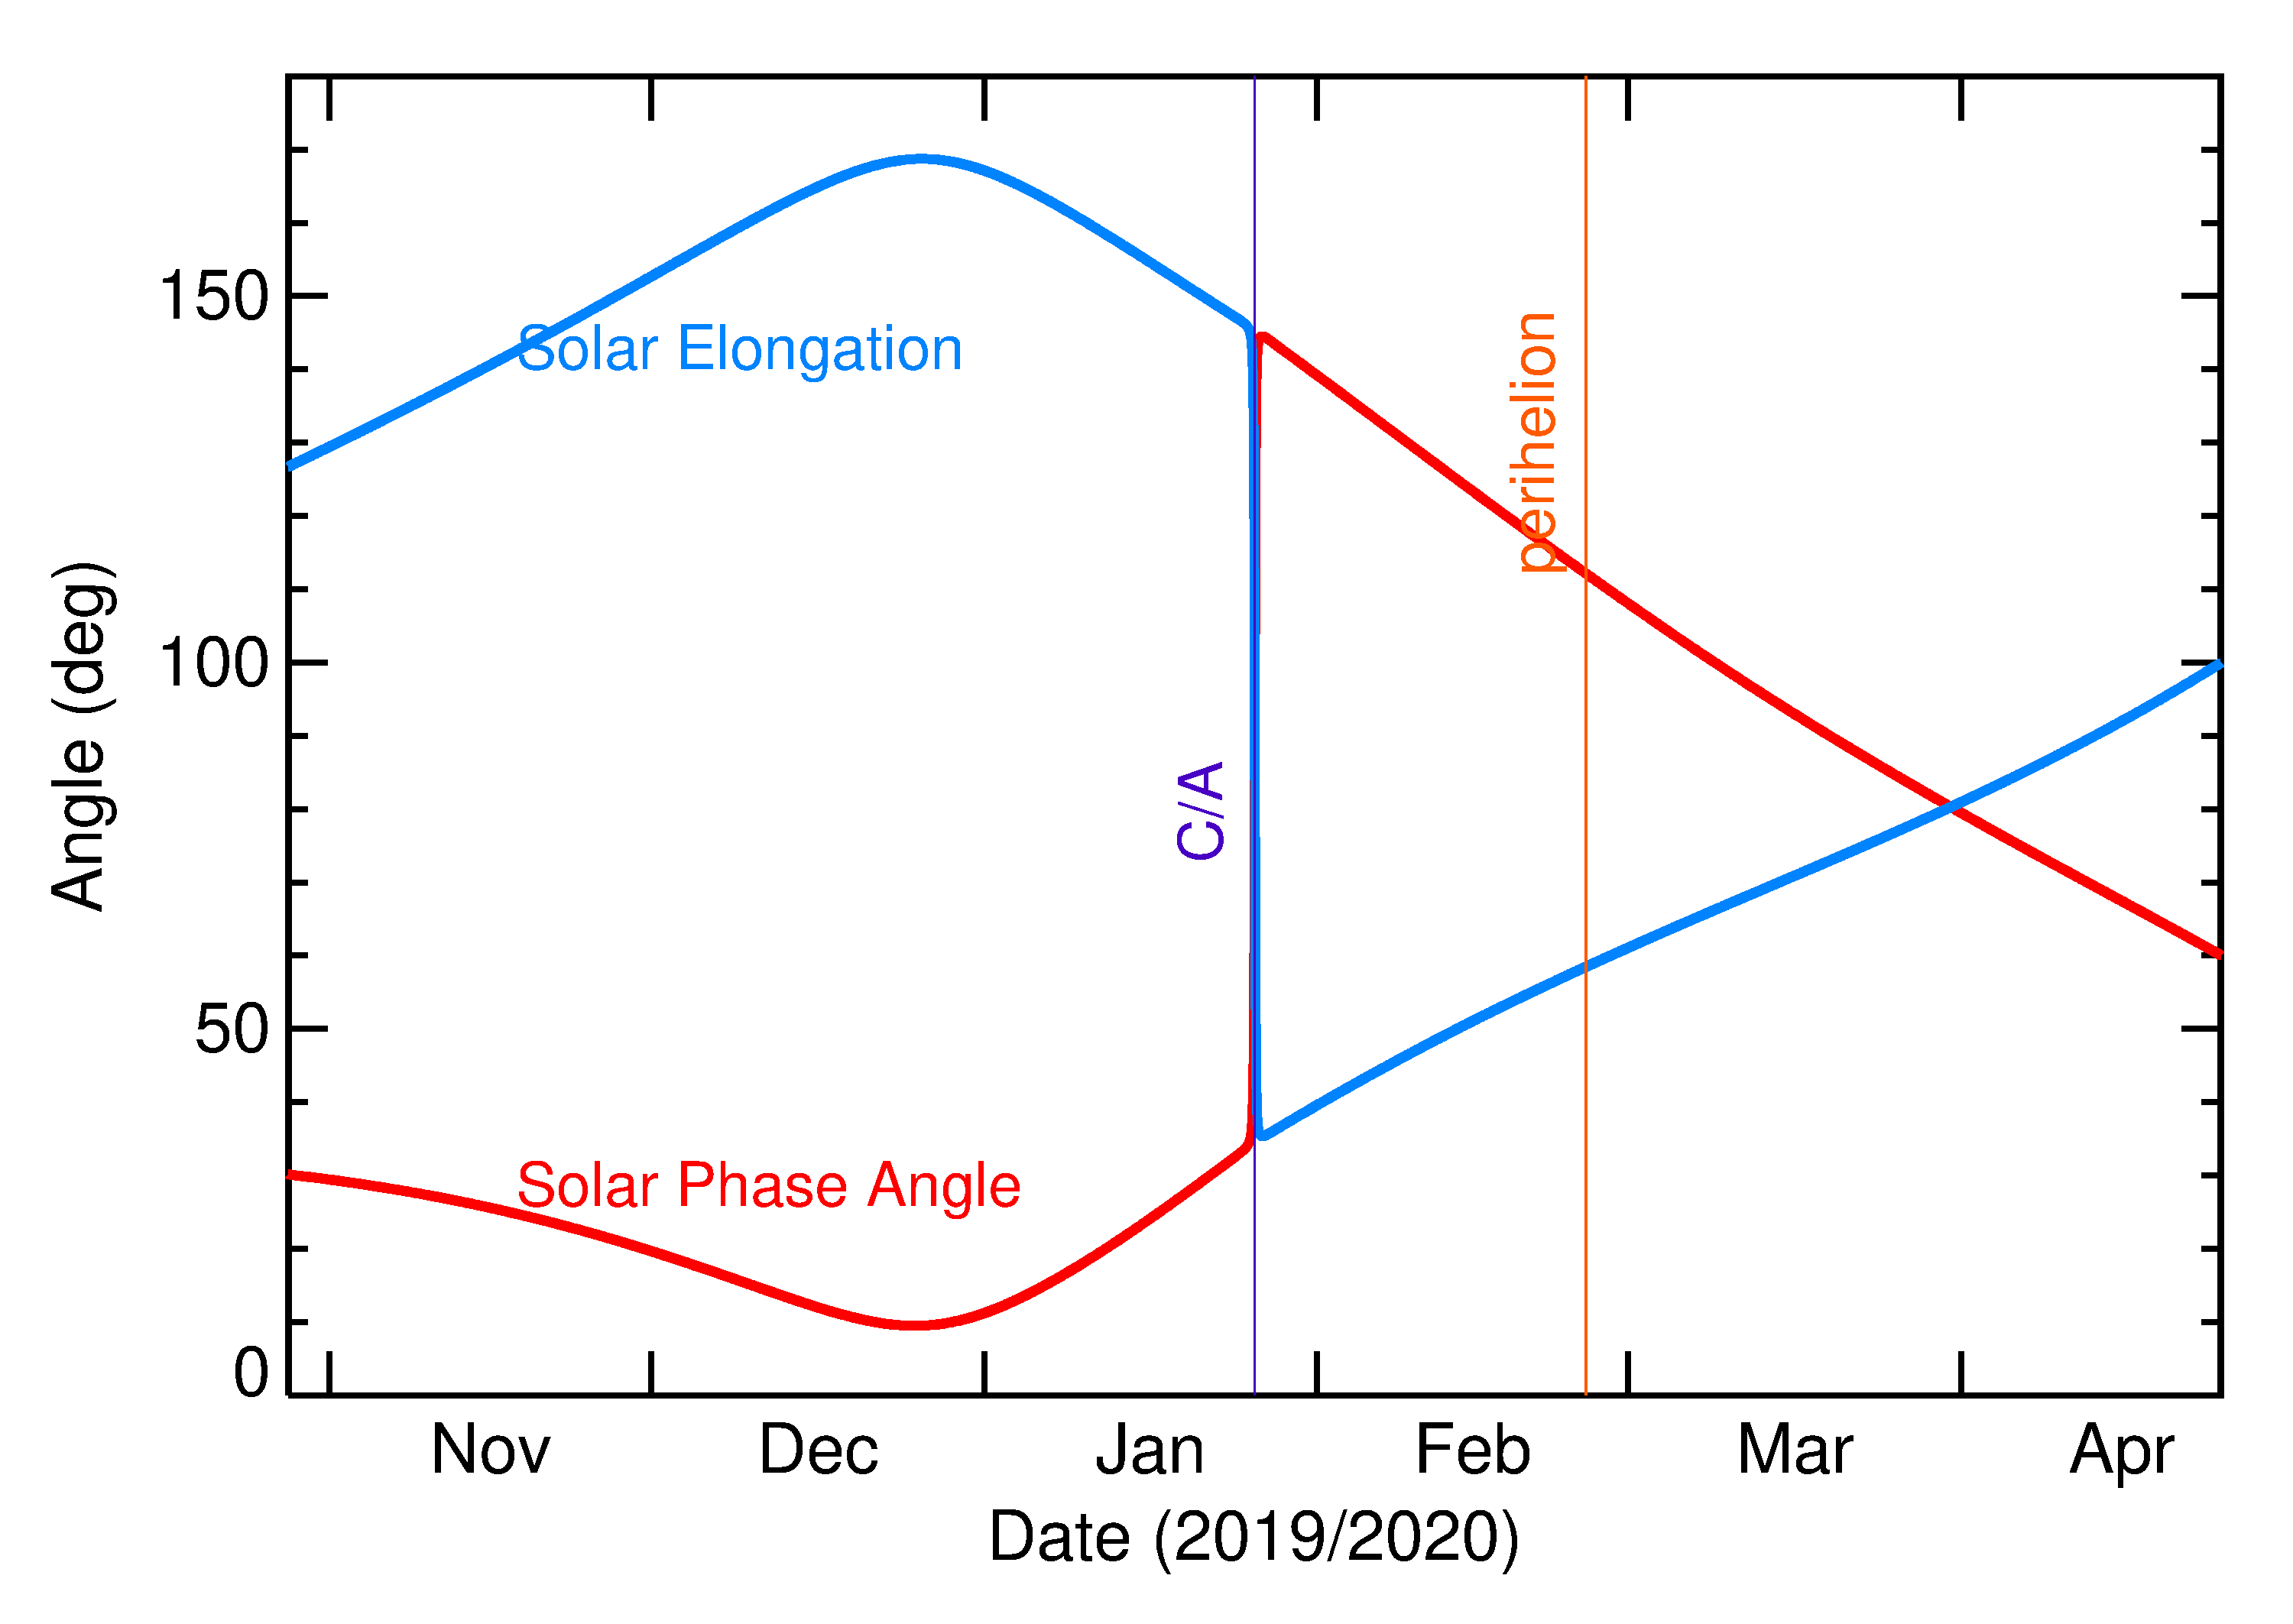 Solar Elongation and Solar Phase Angle of 2020 BH6 in the months around closest approach